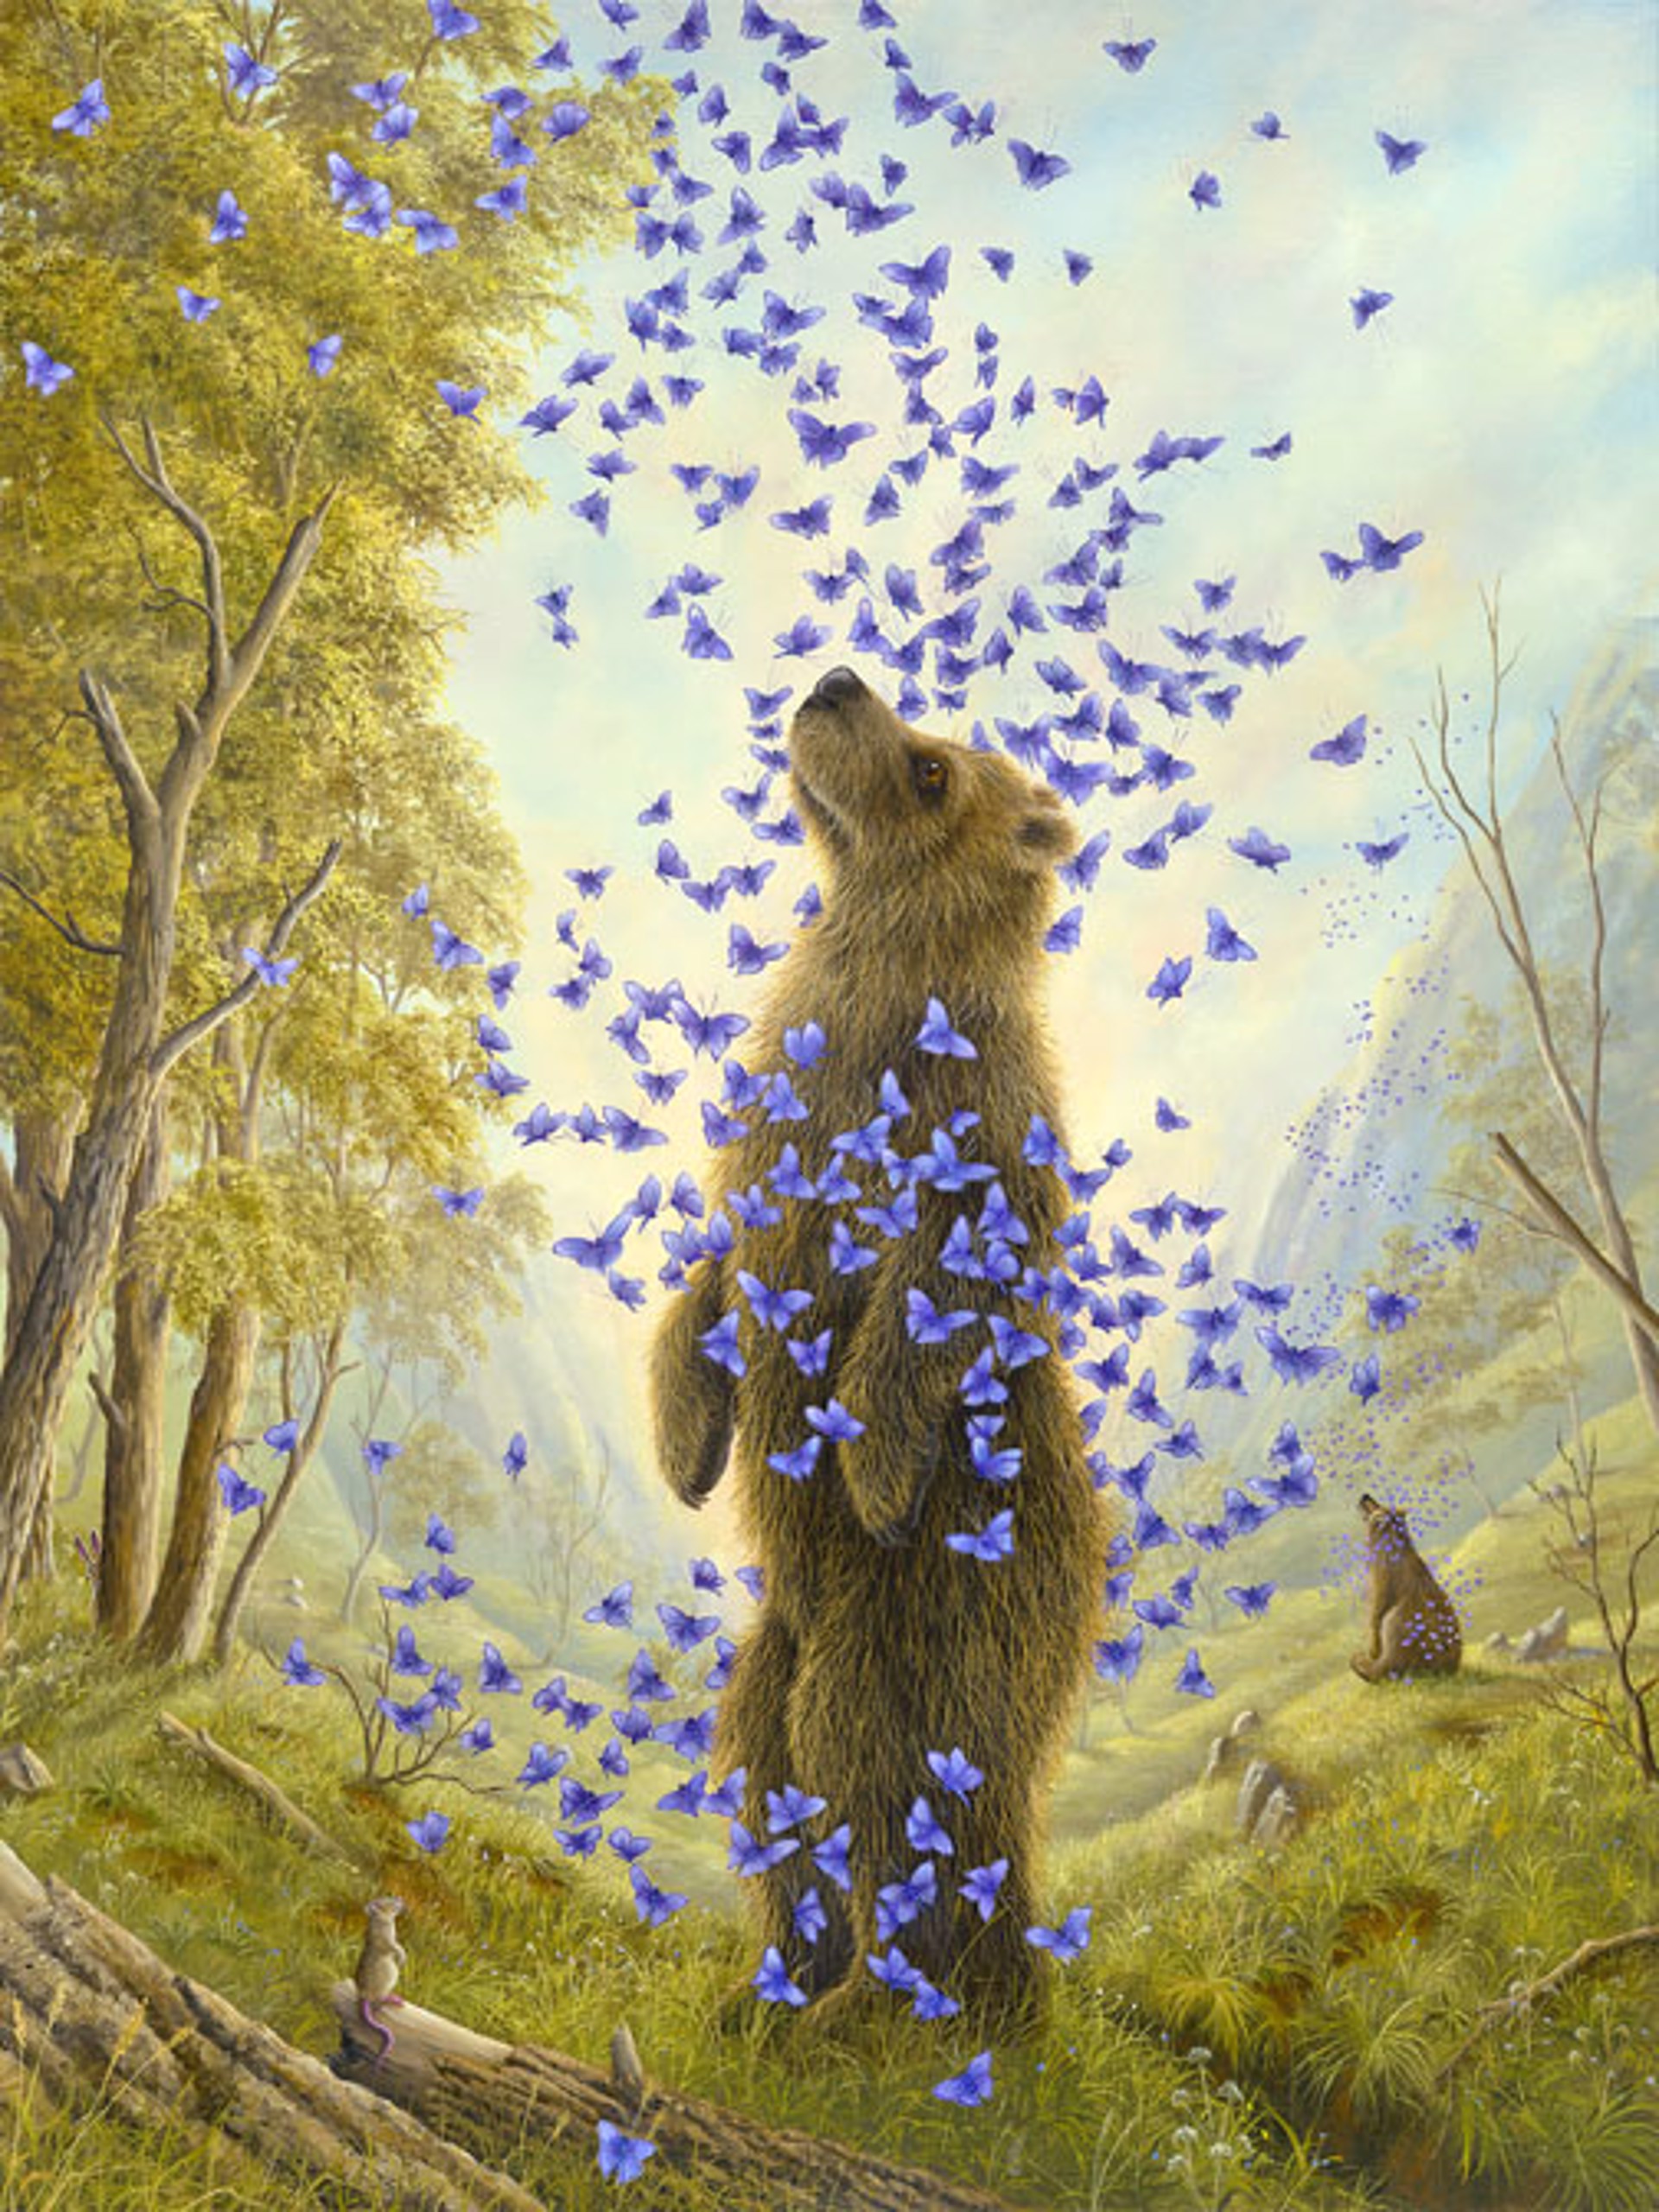 The Embrace II - SOLD OUT ON ALL EDITIONS by Robert Bissell